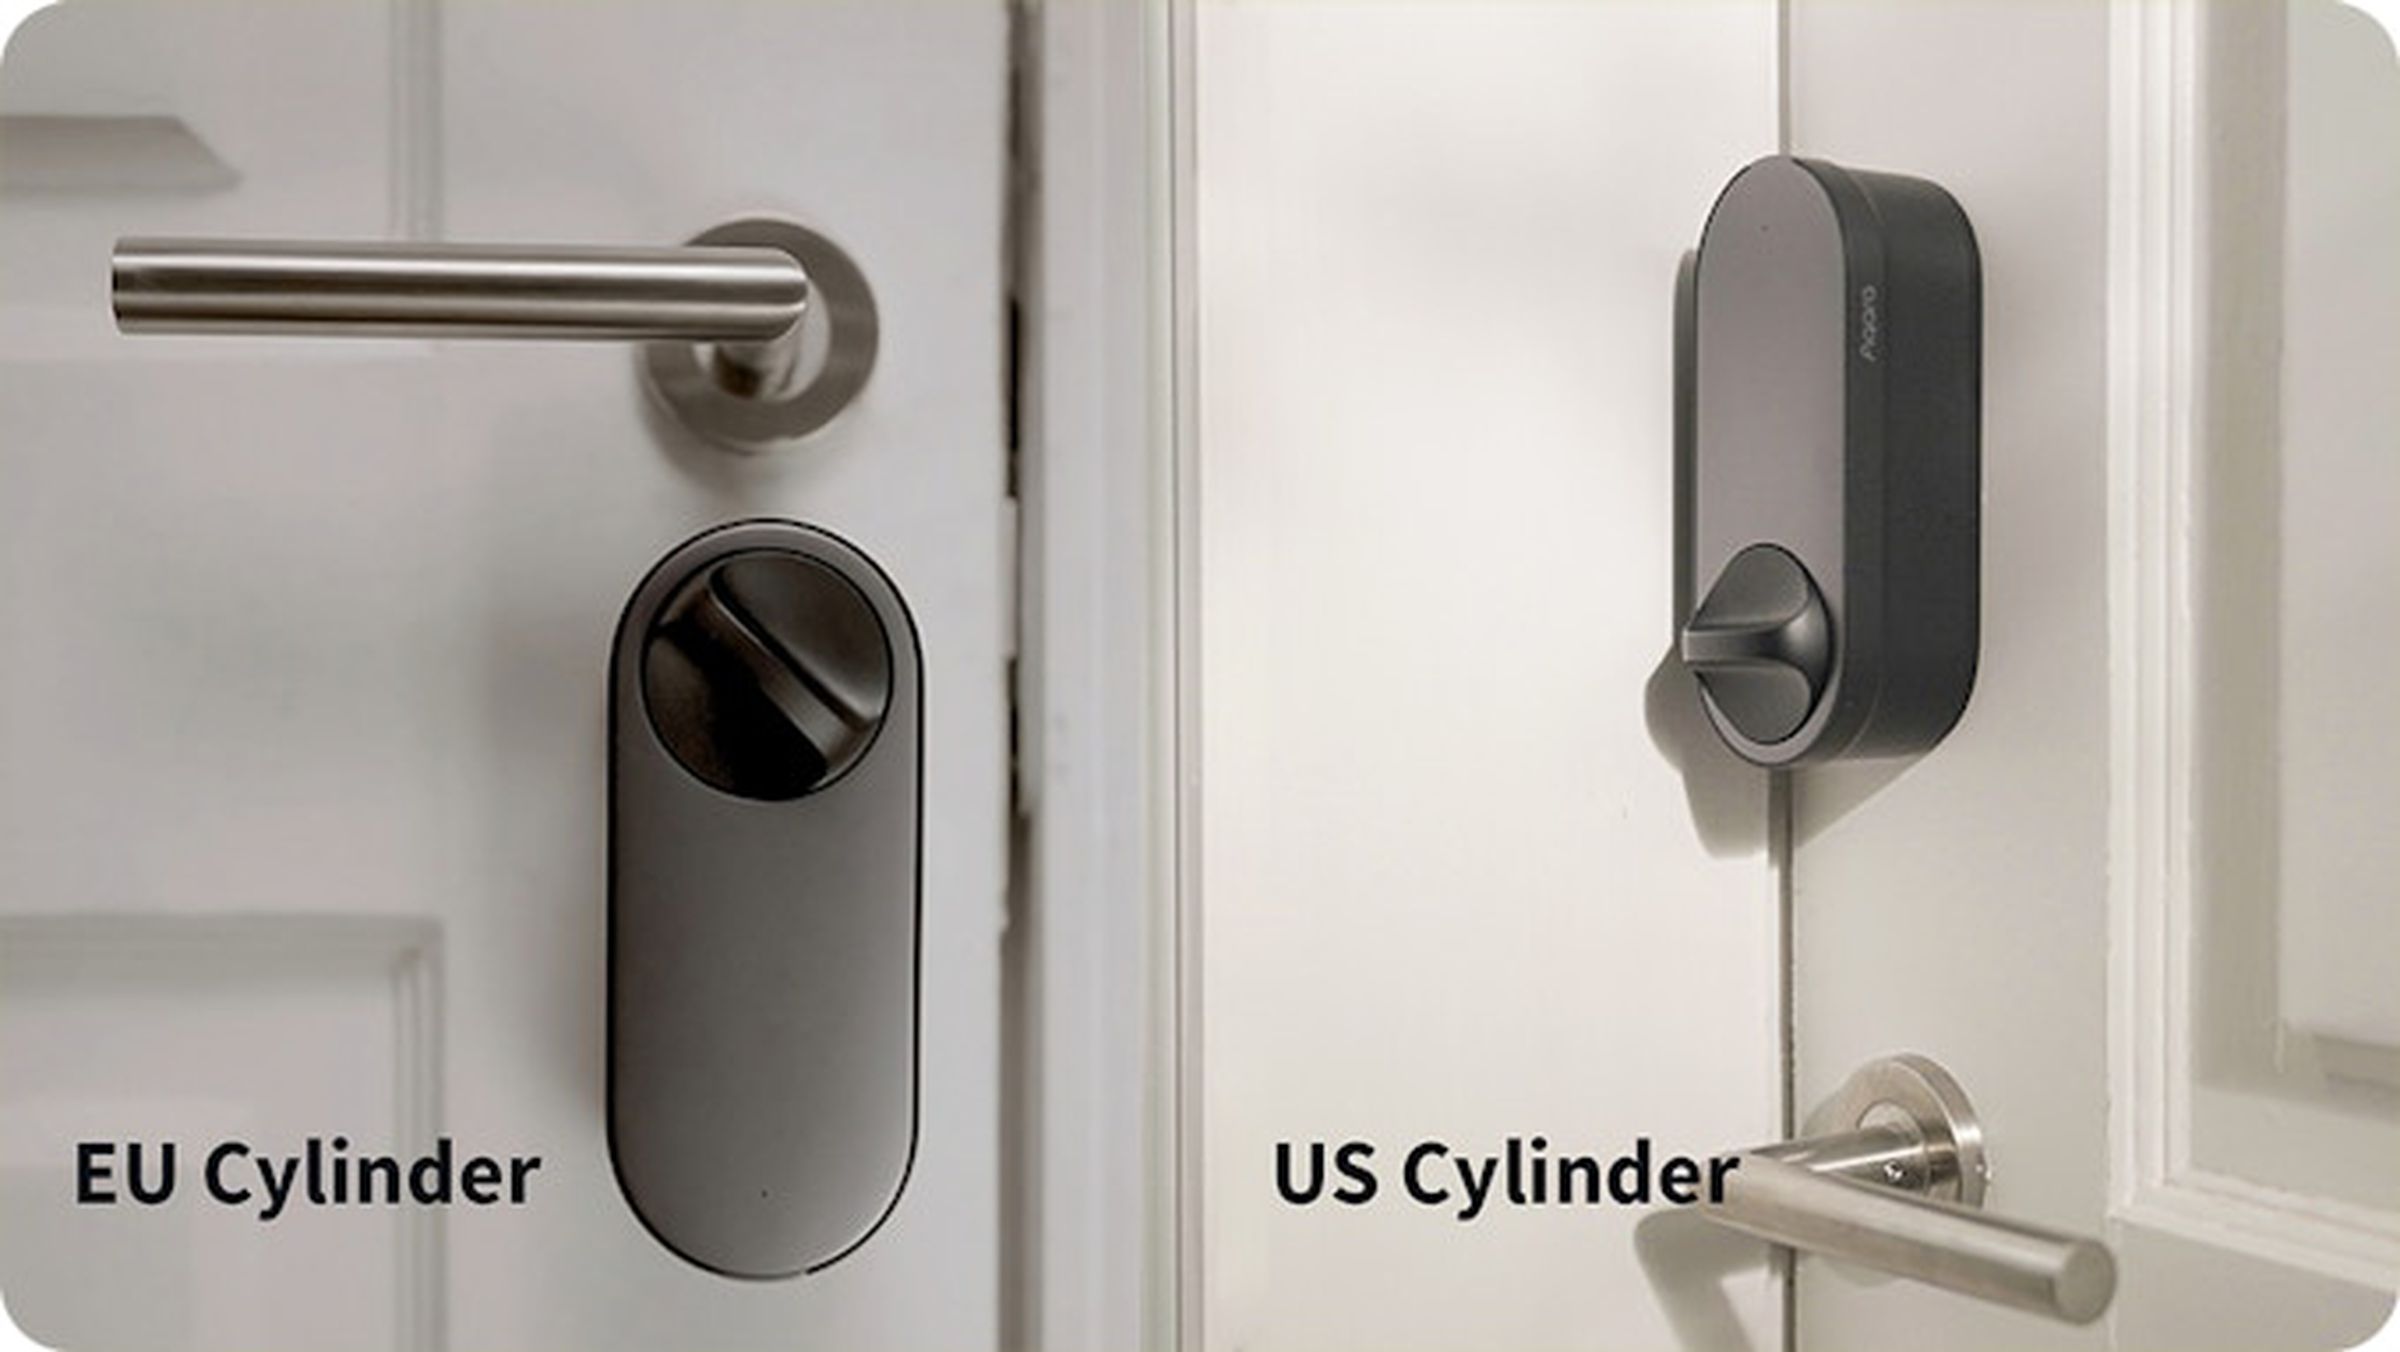 Aqara says the U200 is compatible with most US deadbolts and Euro mortise locks. The EU-style locks require the key to remain in the lock on the inside of the door, but Aqara says you will still be able to open it with a key from the outside for locks that support the Emergency Function. 